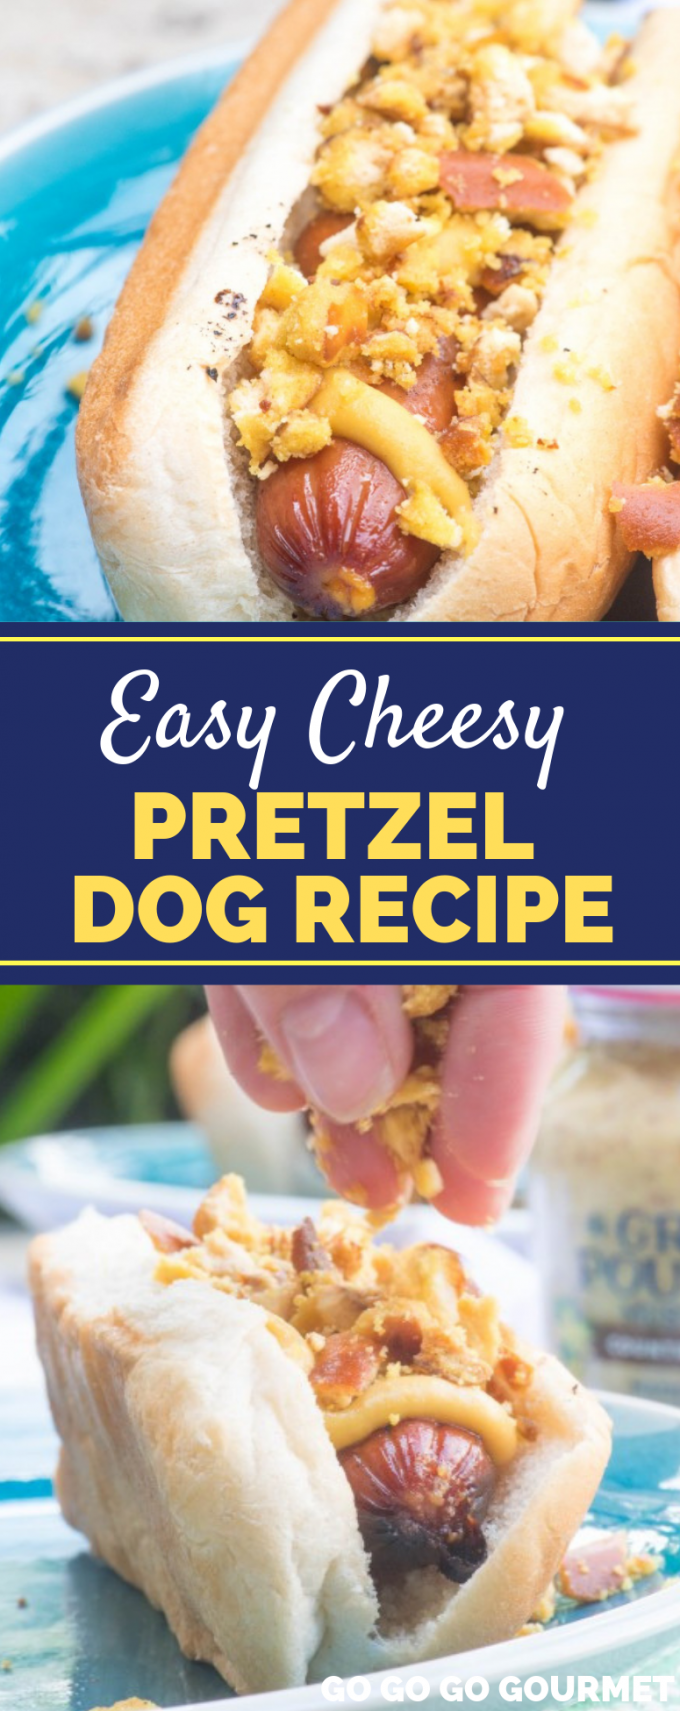 This easy, Cheesy Pretzel Dog recipe is the best! This might just be the easiest homemade BBQ recipe ever, with cheese stuffed hot dogs and crumbled pretzels on top, it can't be beat! #gogogogourmet #cheesypretzeldogs #pretzeldogs #hotdogrecipe via @gogogogourmet